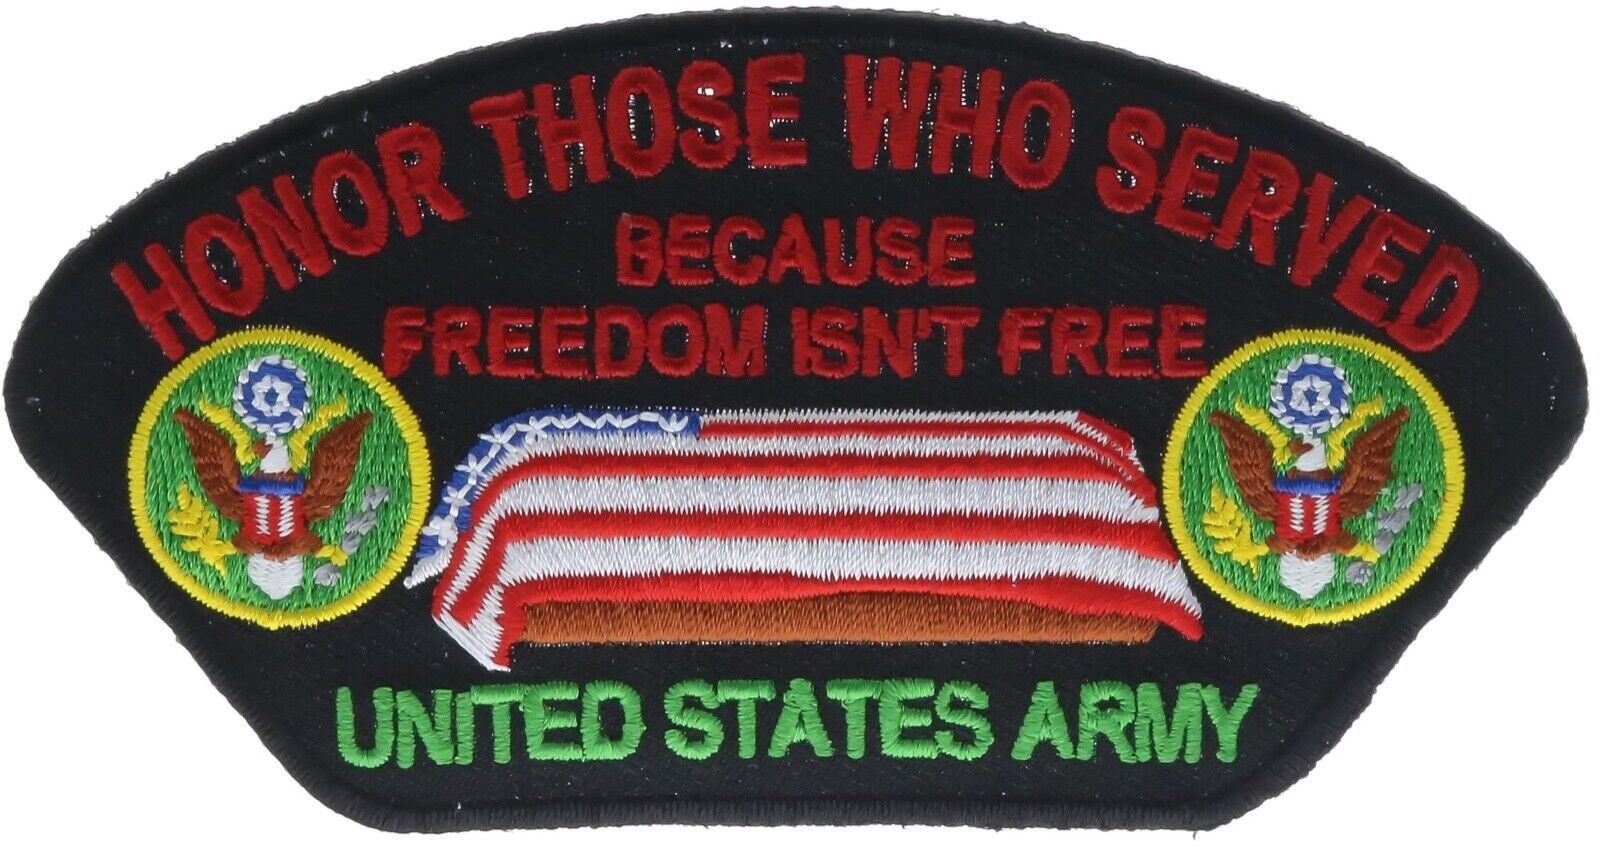 Honor Those Who Served US Army Troops Freedom Isn't Free Veteran Patch PW F1D16R